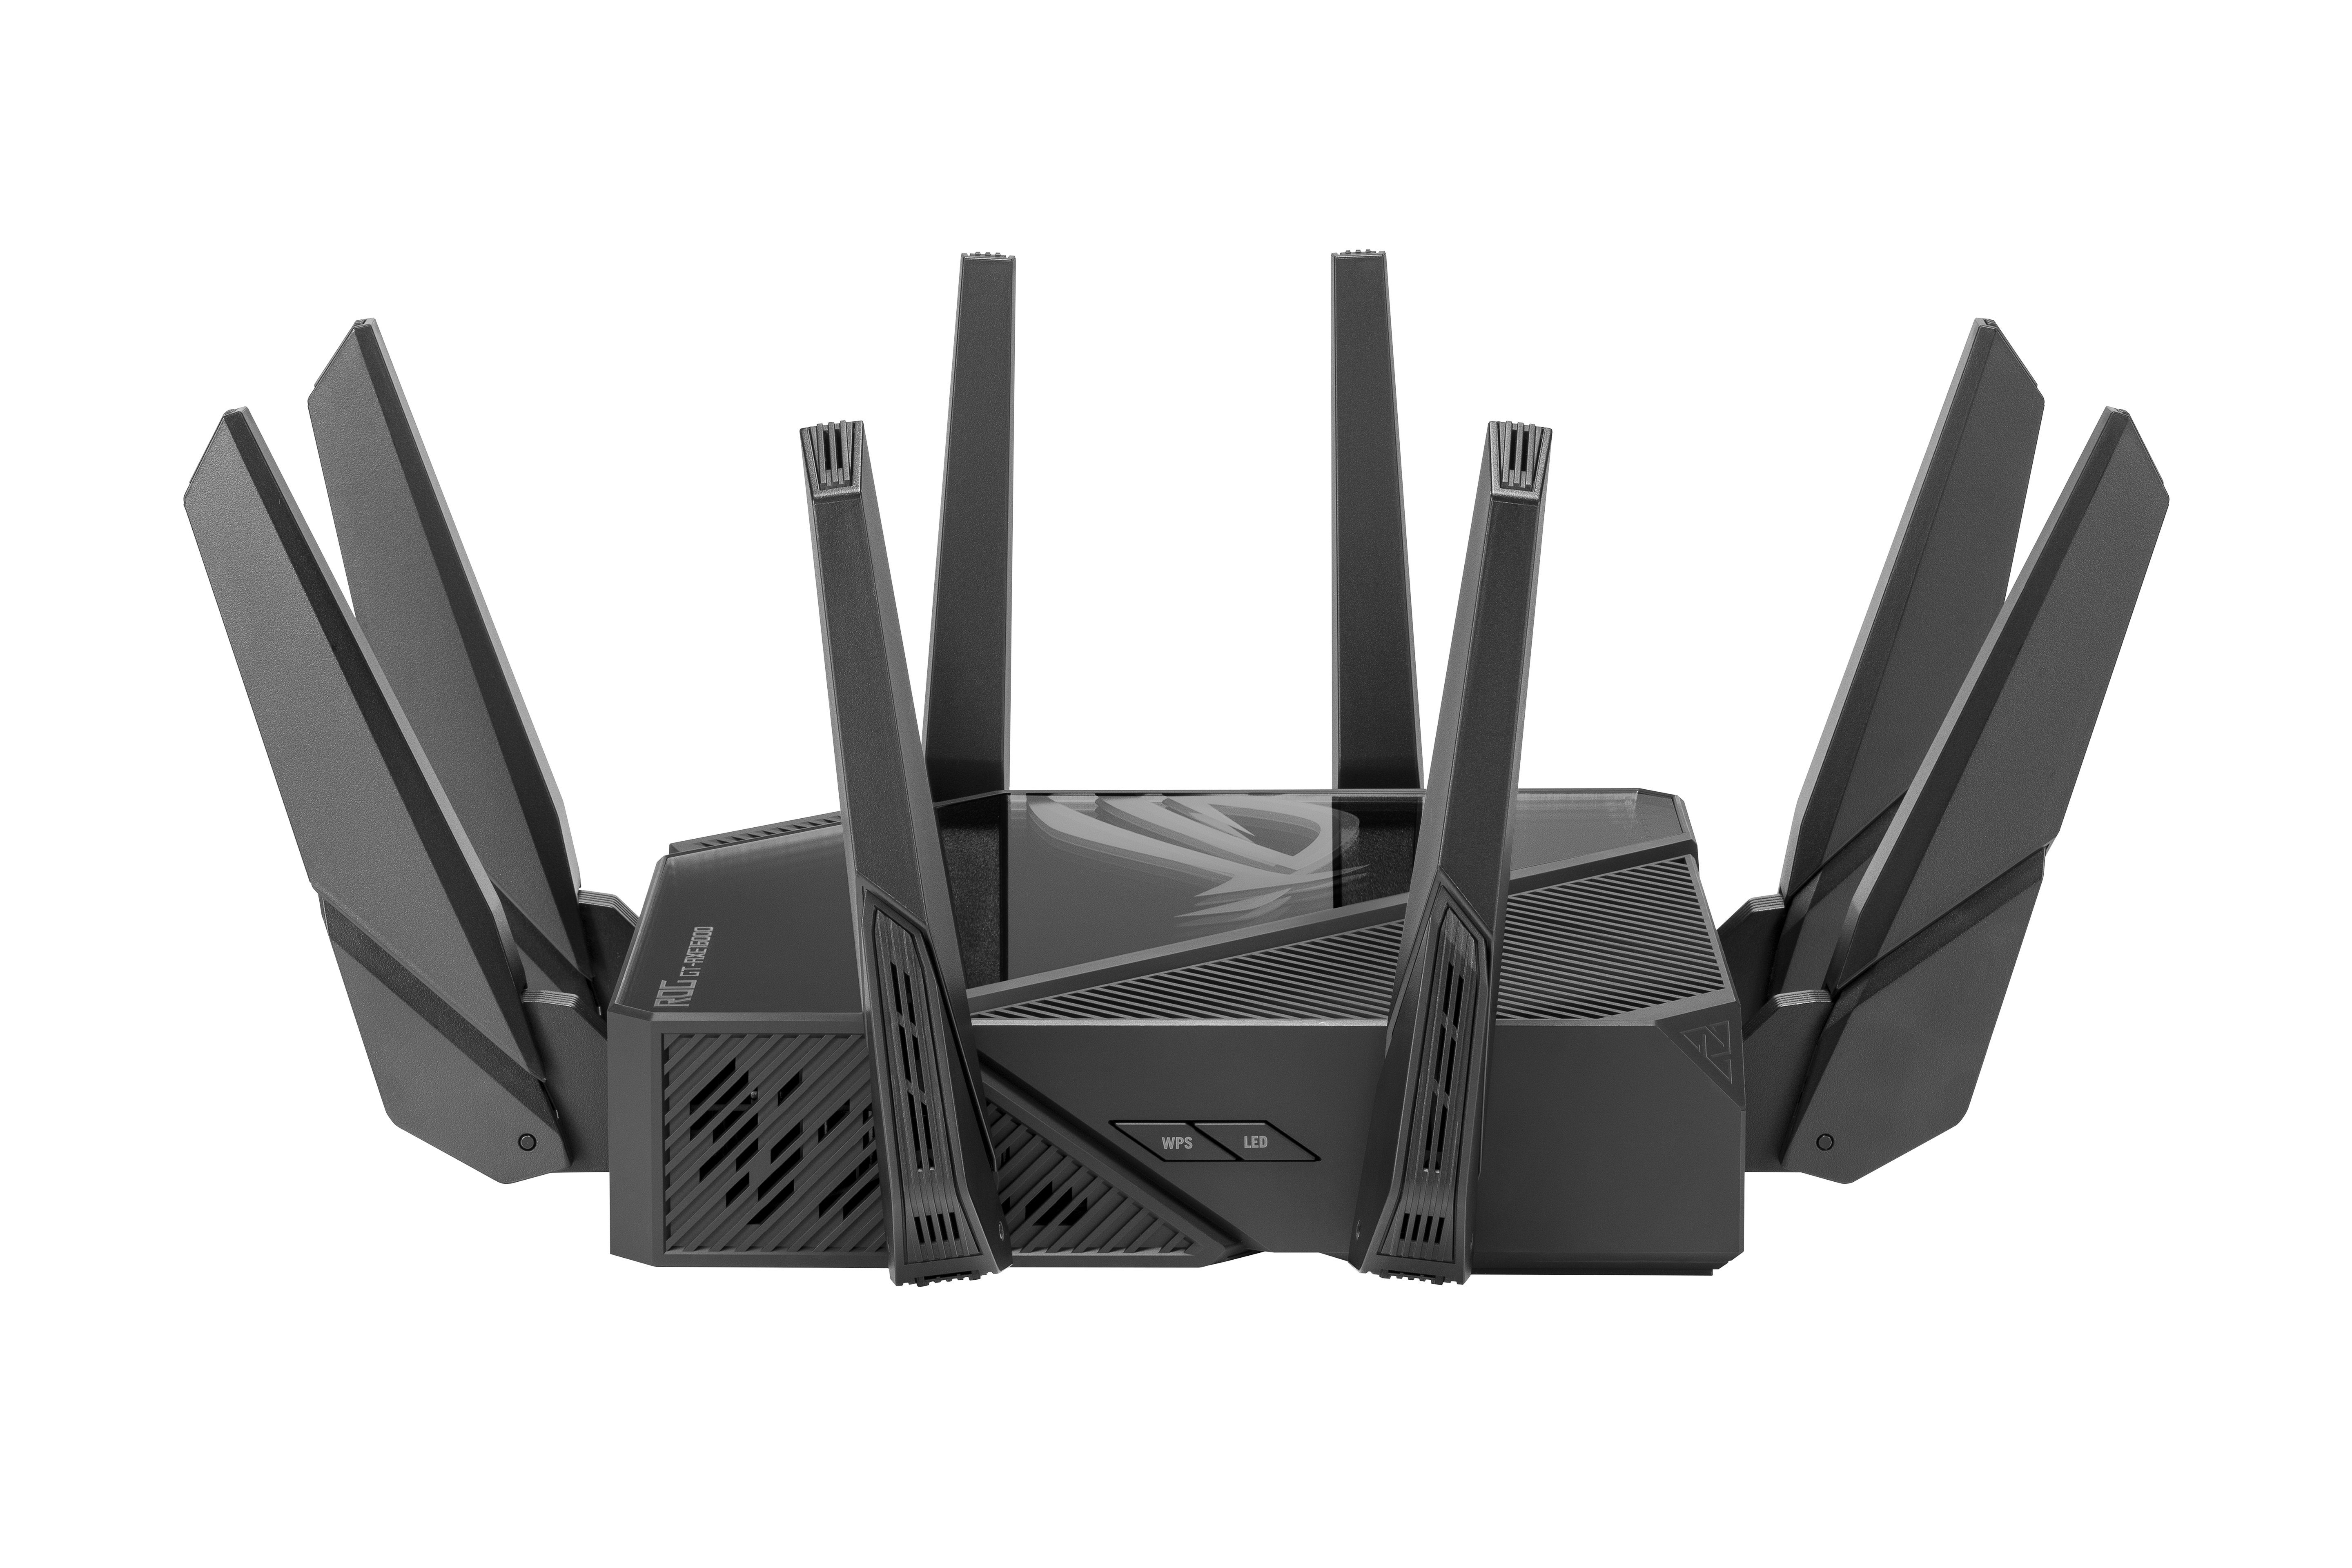 WLAN-Router 6 Router ROG GT-AXE16000 Rapture Asus AiMesh Asus WiFi